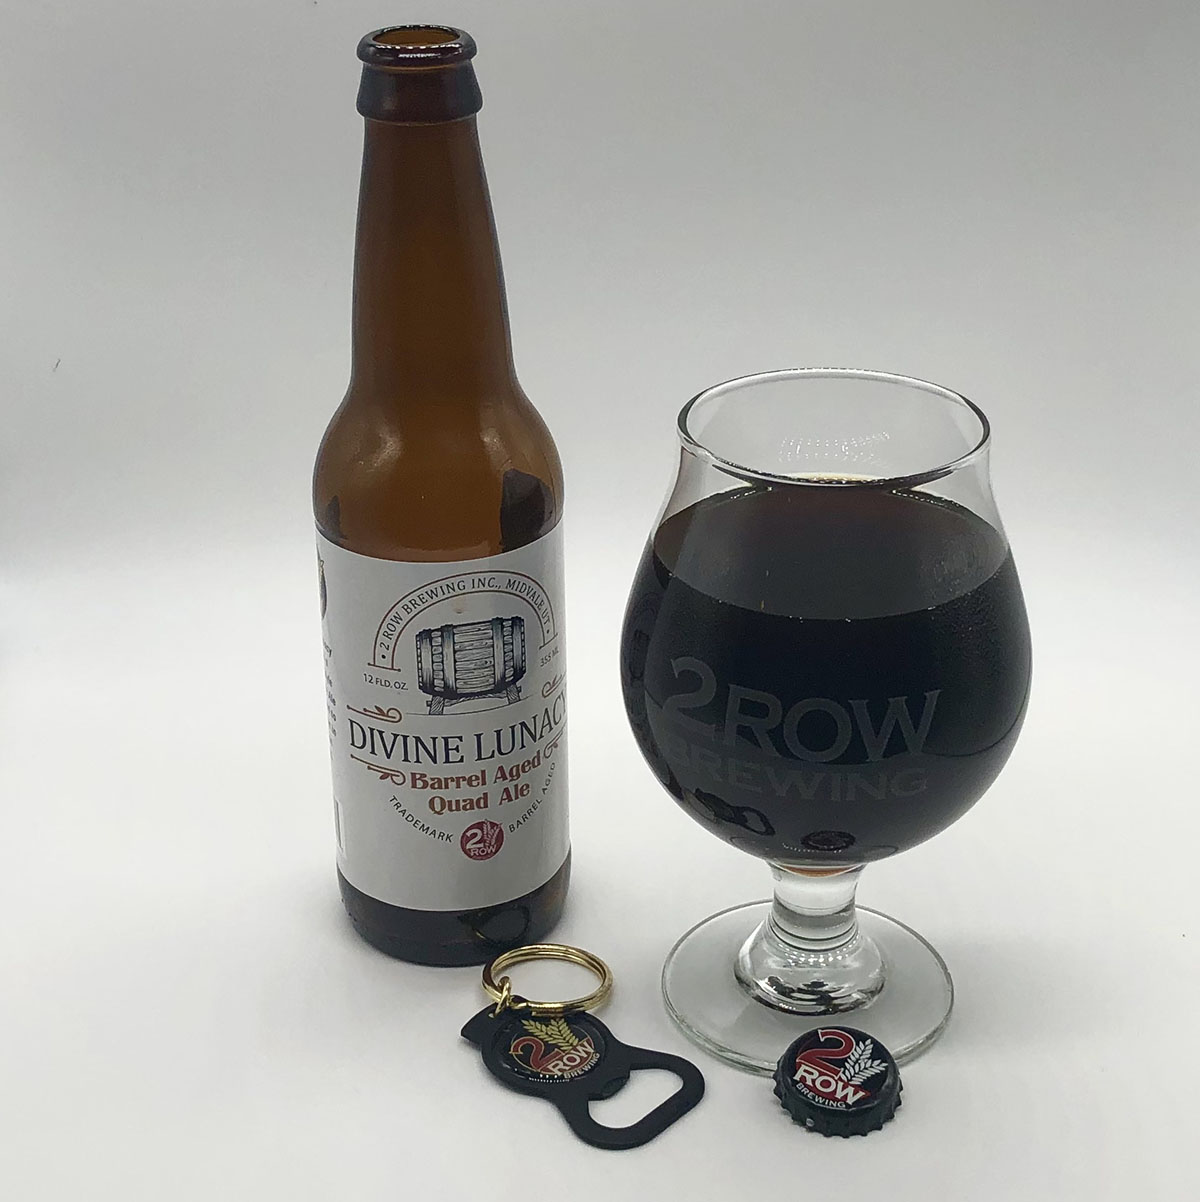 Divine Lunacy, a barrel-aged Belgian Quad by Utah's 2 Row Brewing, clocks in at 11.5% ABV and features aromas of caramel and toffee. Dark, dried fruits are prominent, as is some vanilla, making this a decadent sipper.